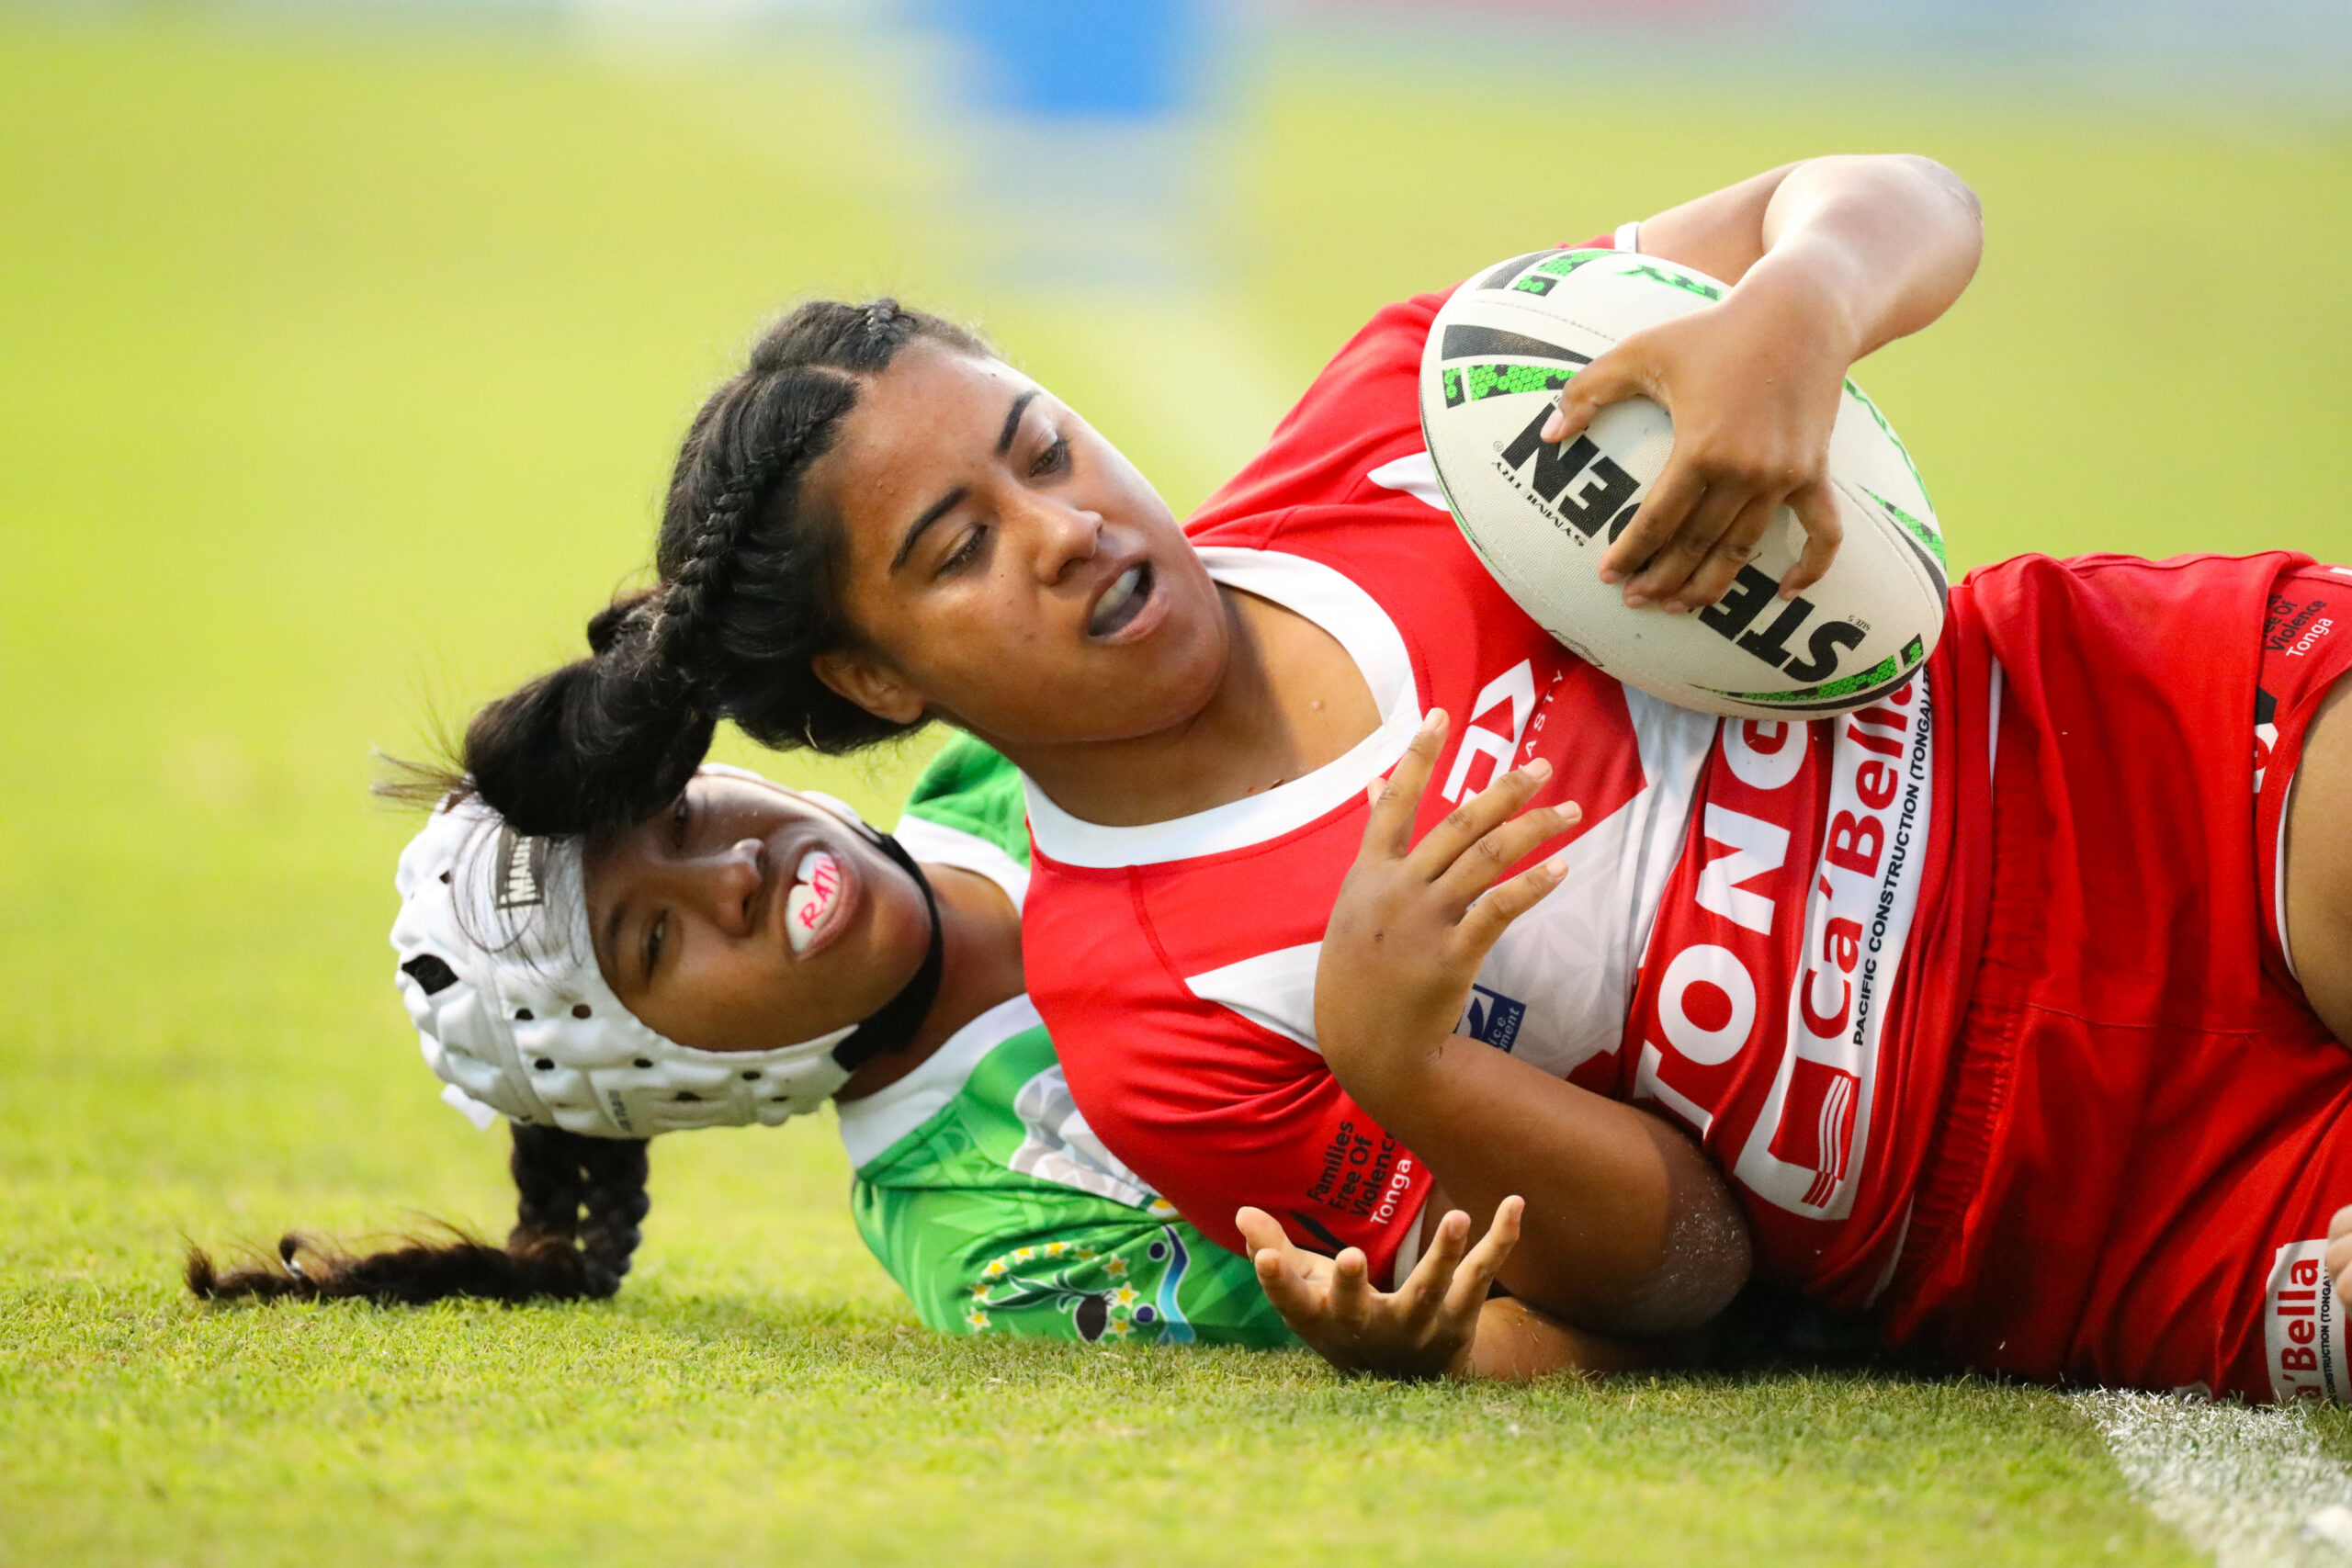 Women playing rugby league